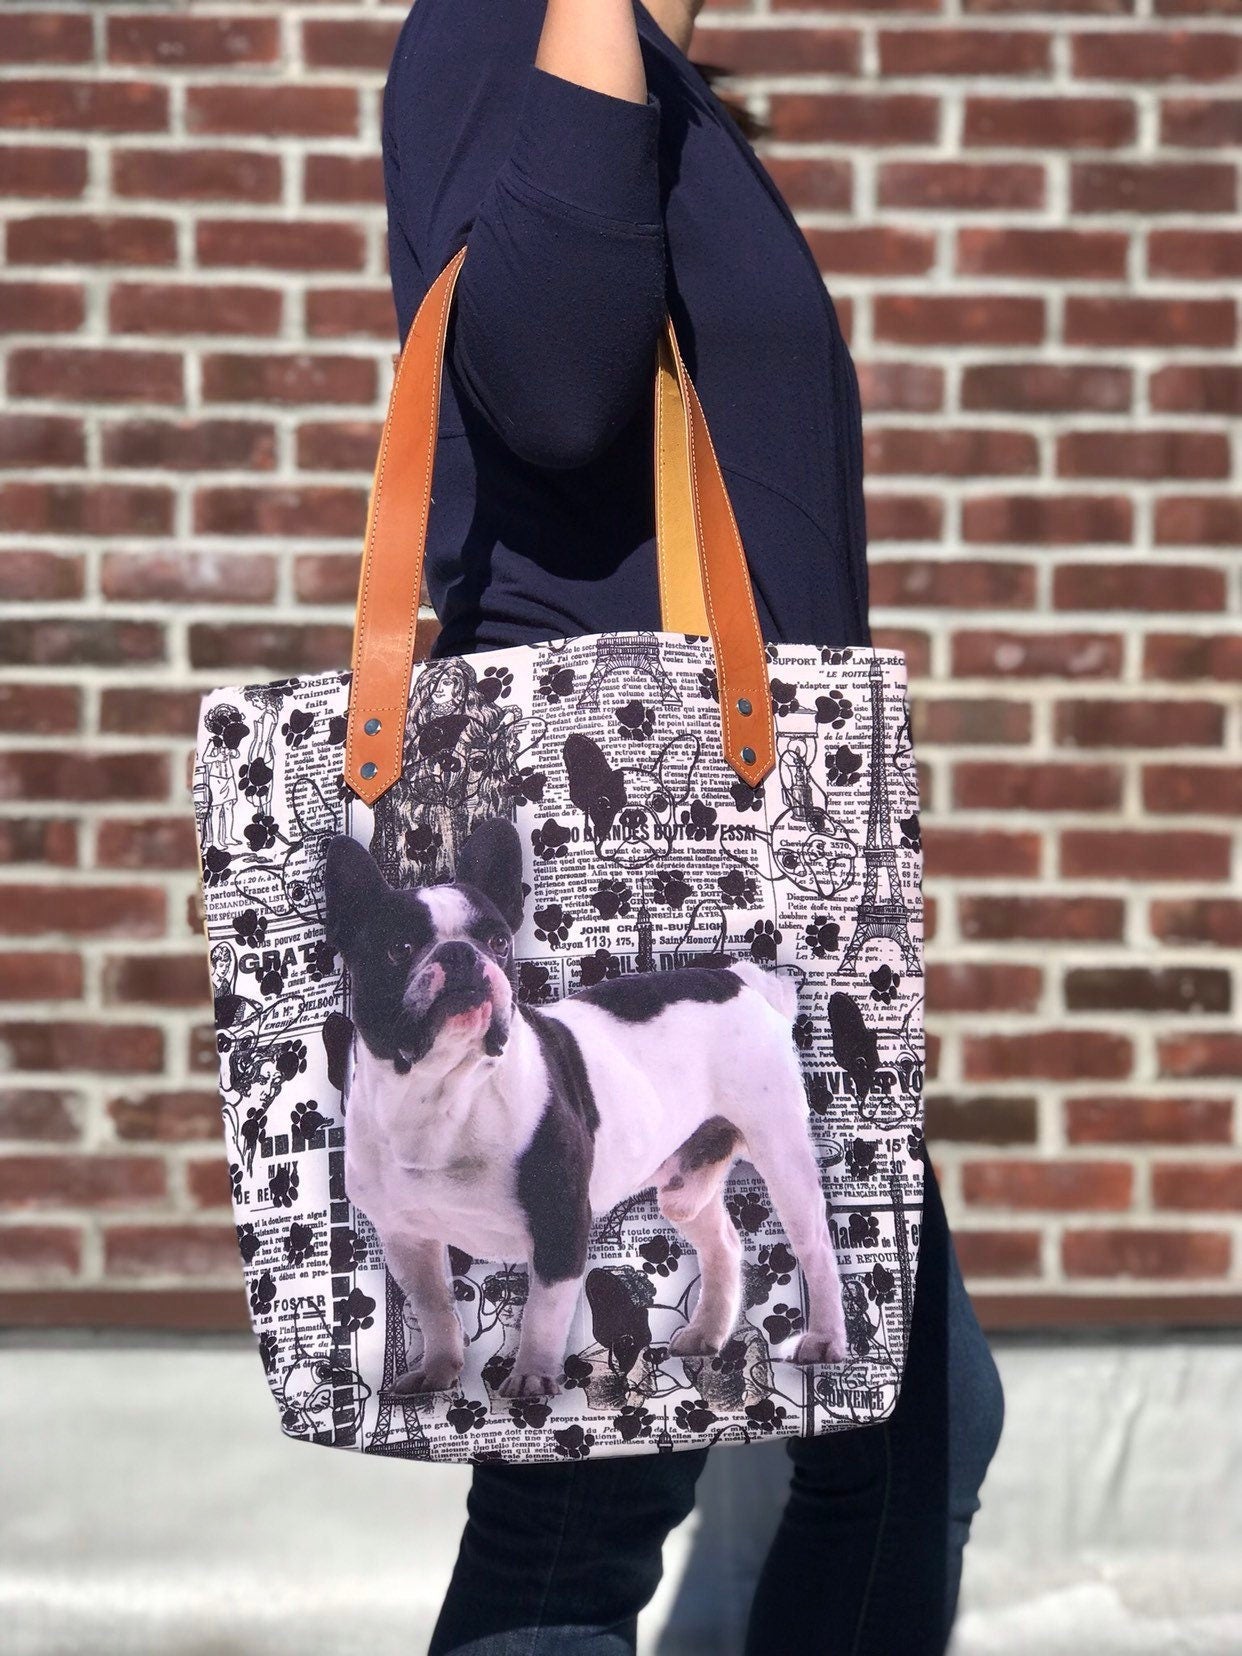 French Bulldog TOTE BAG !! Frenchie lover, tote bag, animal lovers, dog lovers.